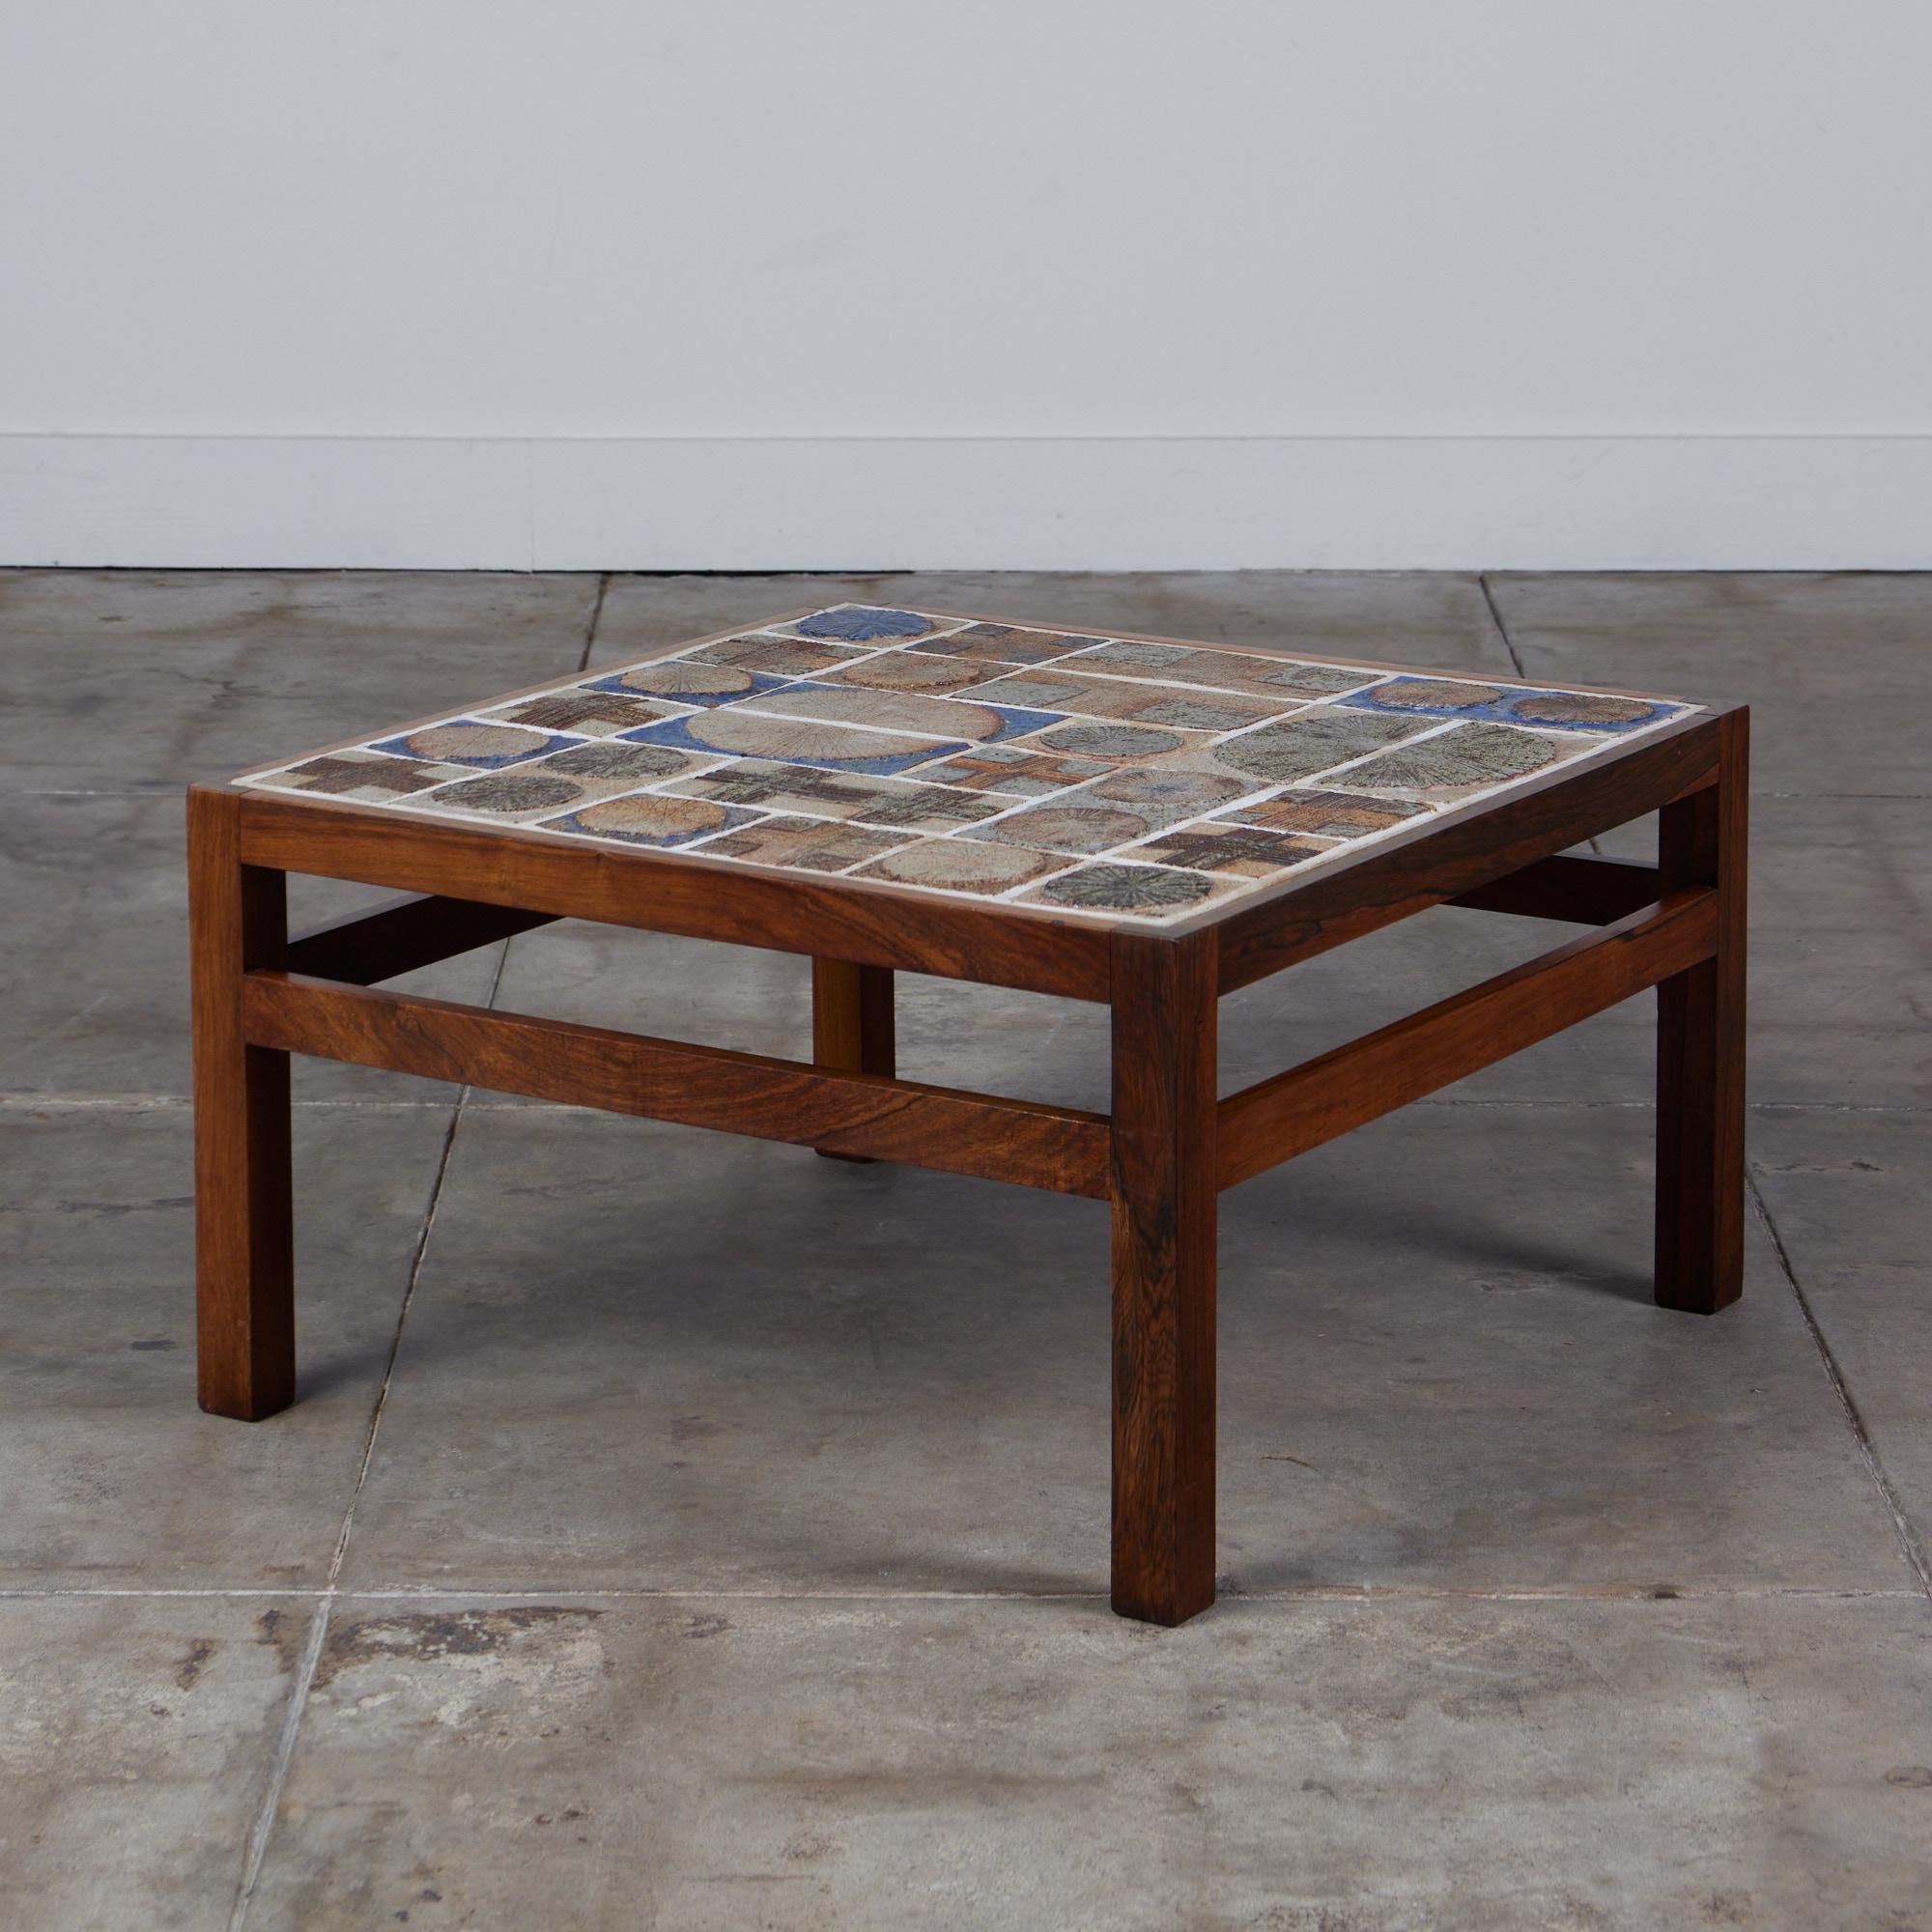 Tile topped coffee table designed by Tue Poulsen for Willy Beck, c.1960s, Denmark. The square rosewood frame and legs were designed by Erik Wörtz and the ceramic tiles were created by artist Tue Poulsen.

Cites notice: Due to stringent regulations